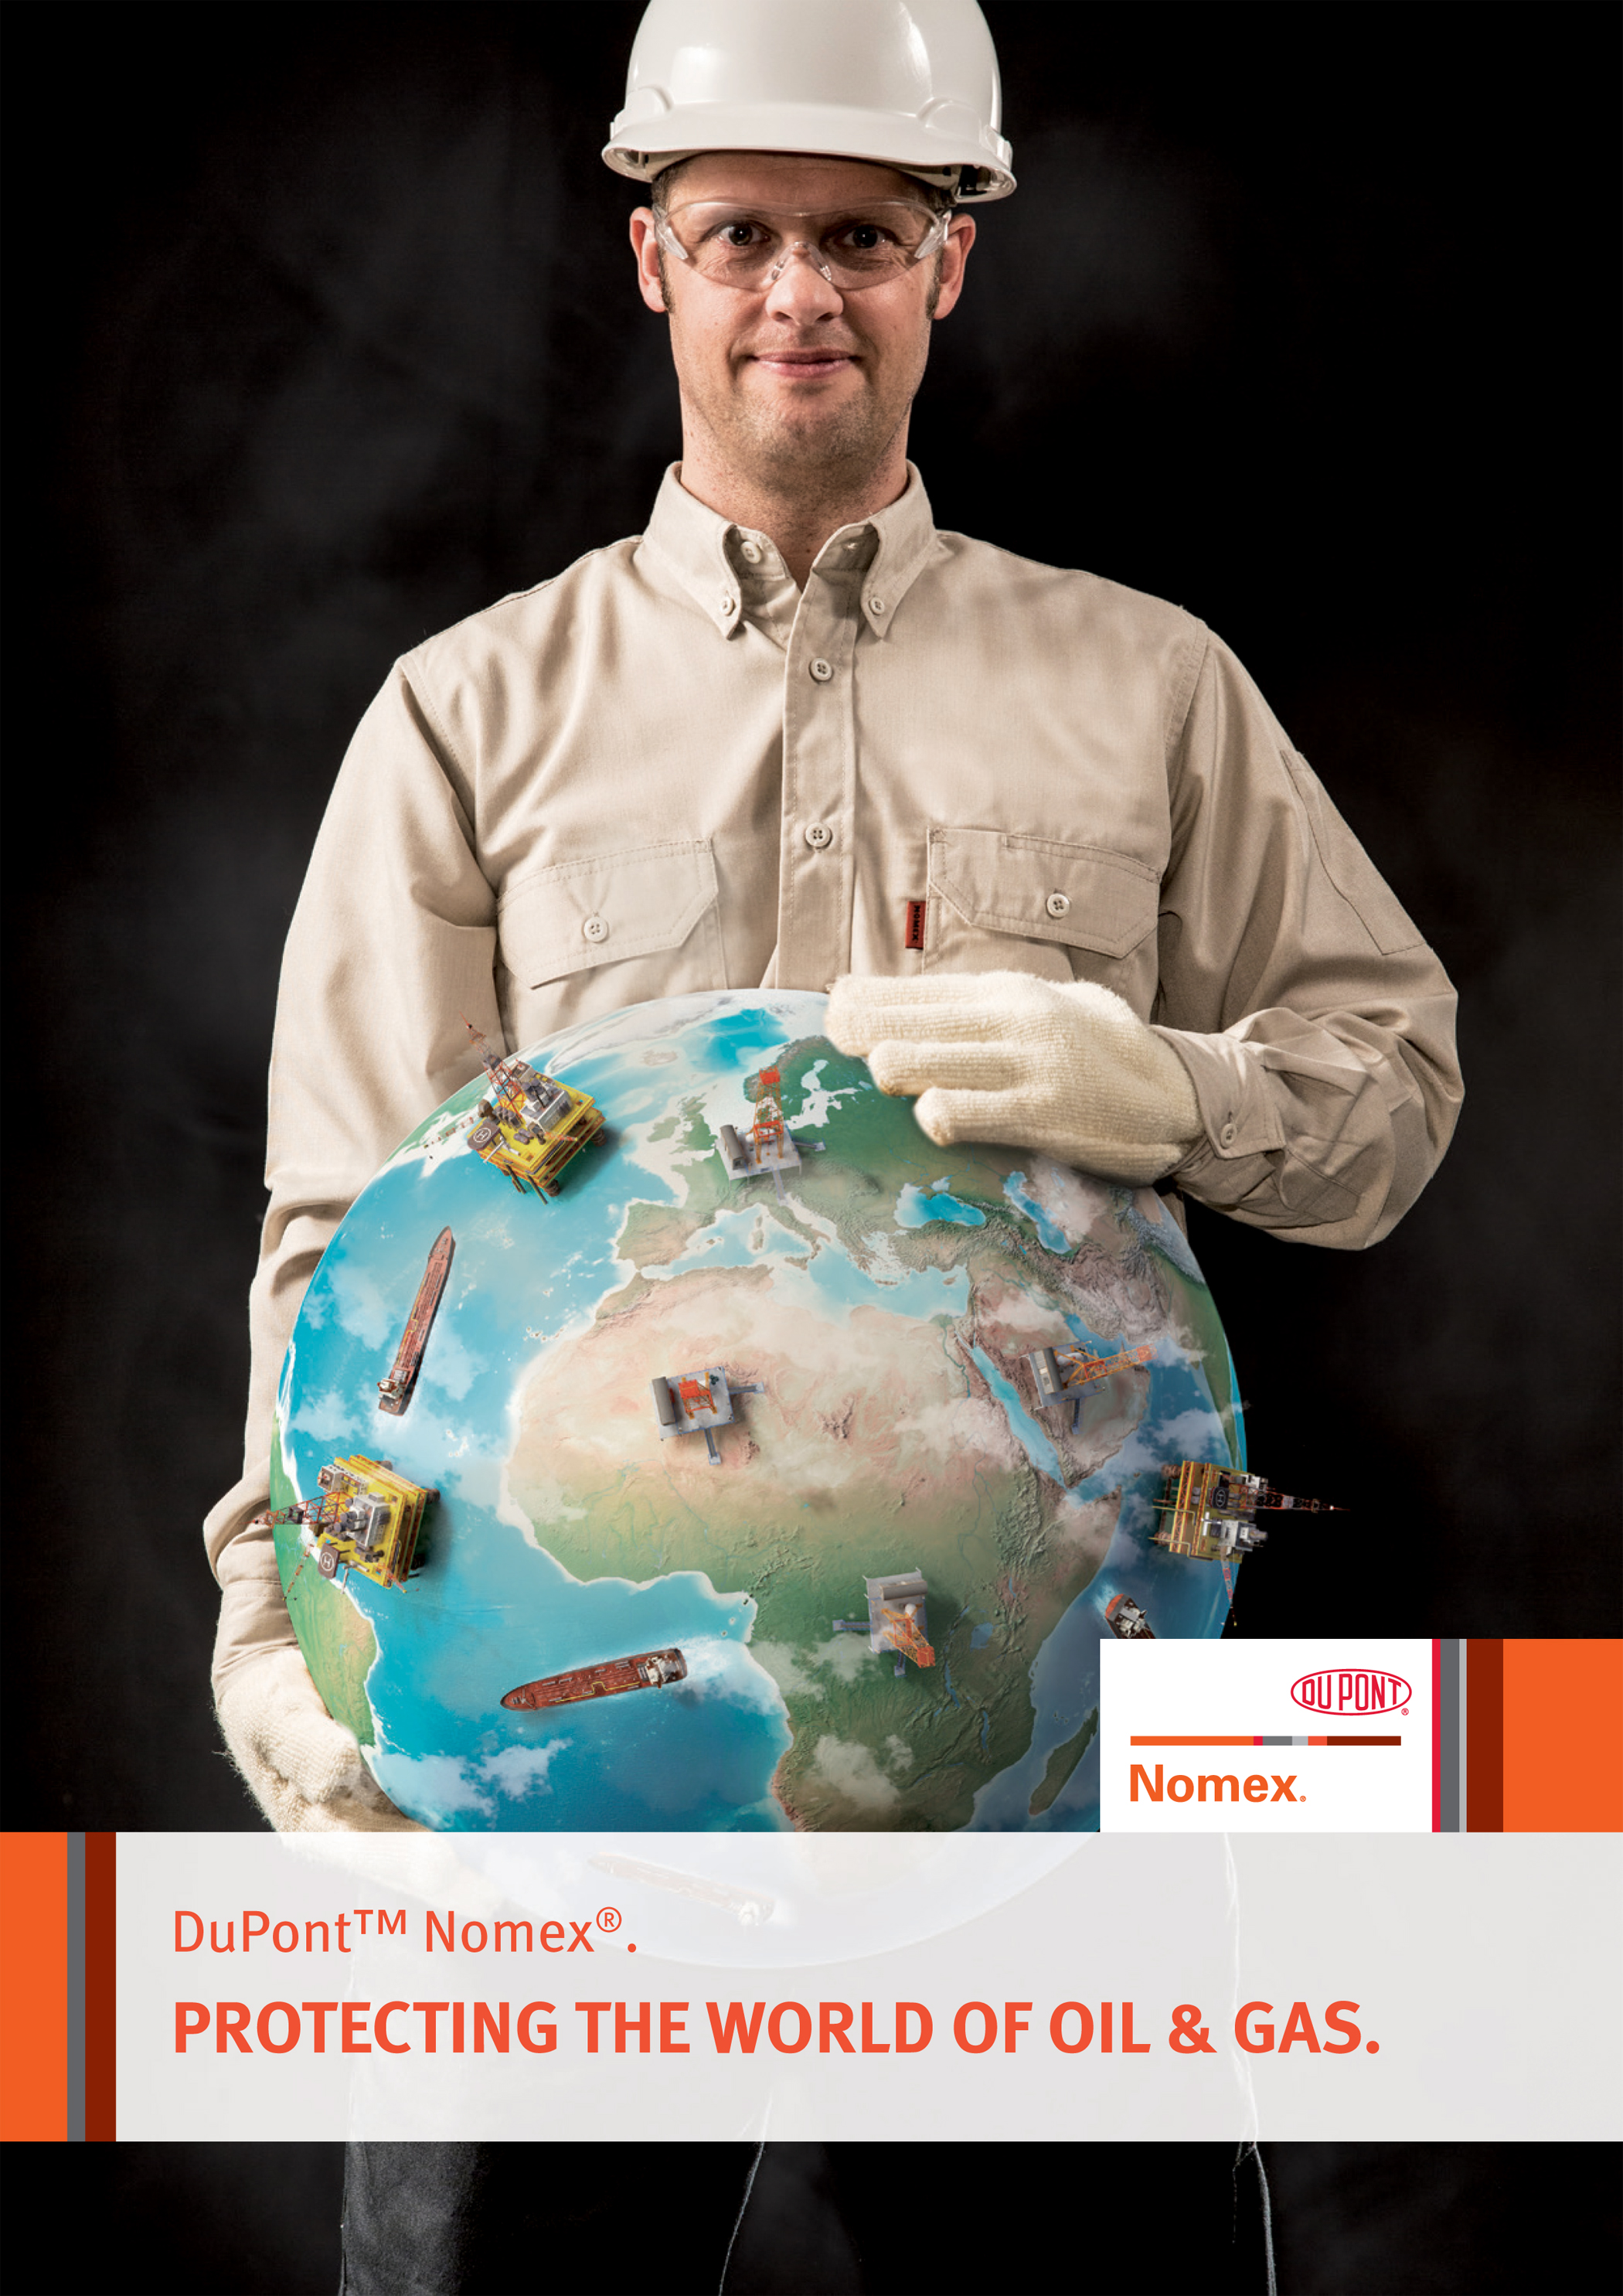 DuPont™ Nomex® - Protecting the World of Oil & Gas